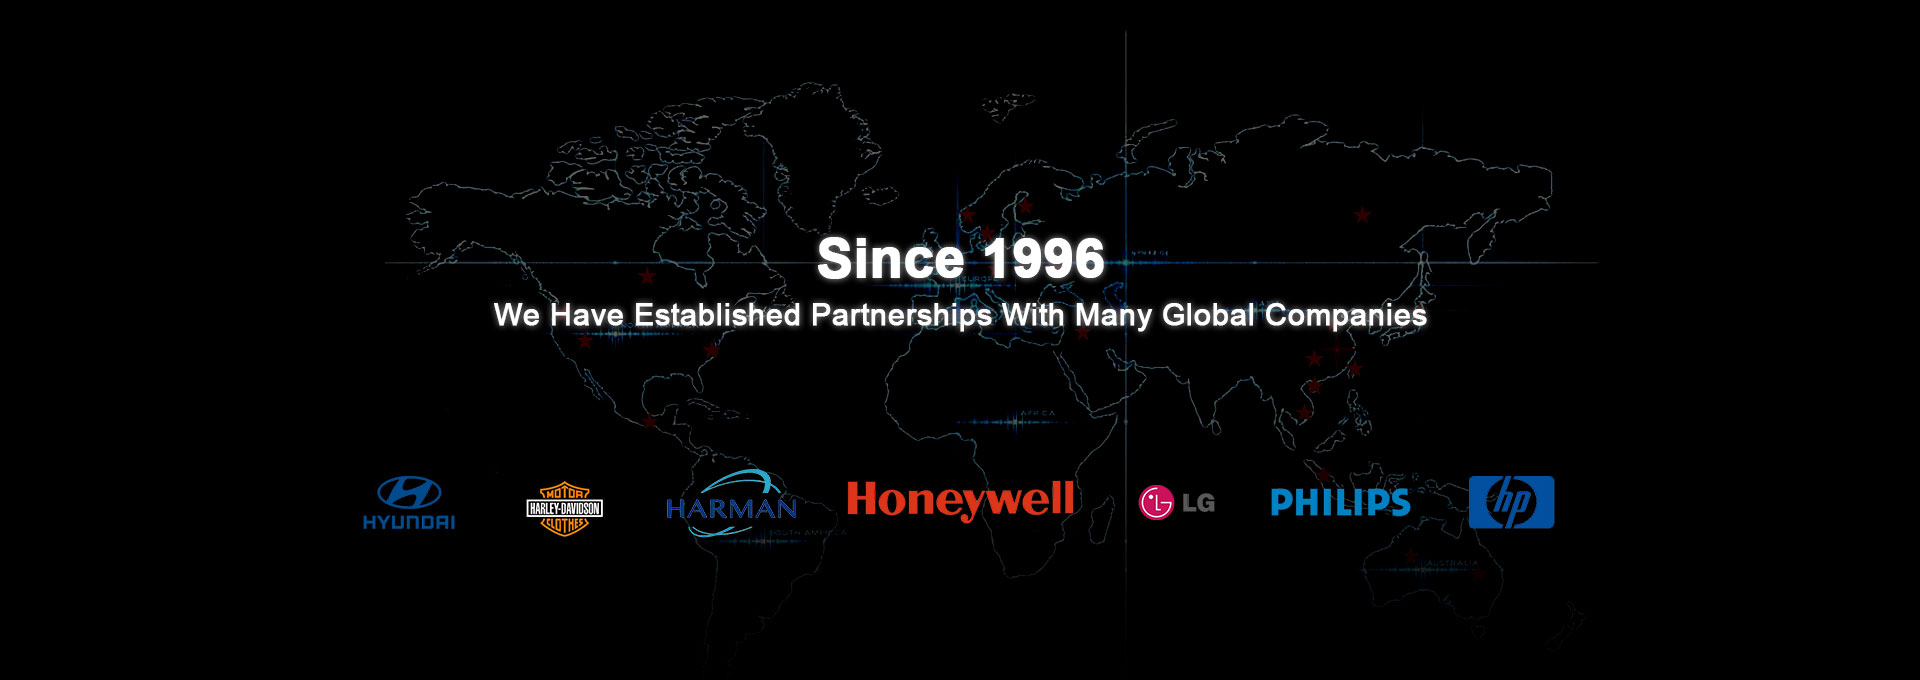 Since 1996, We Have Established Partnerships With Many Global Companies